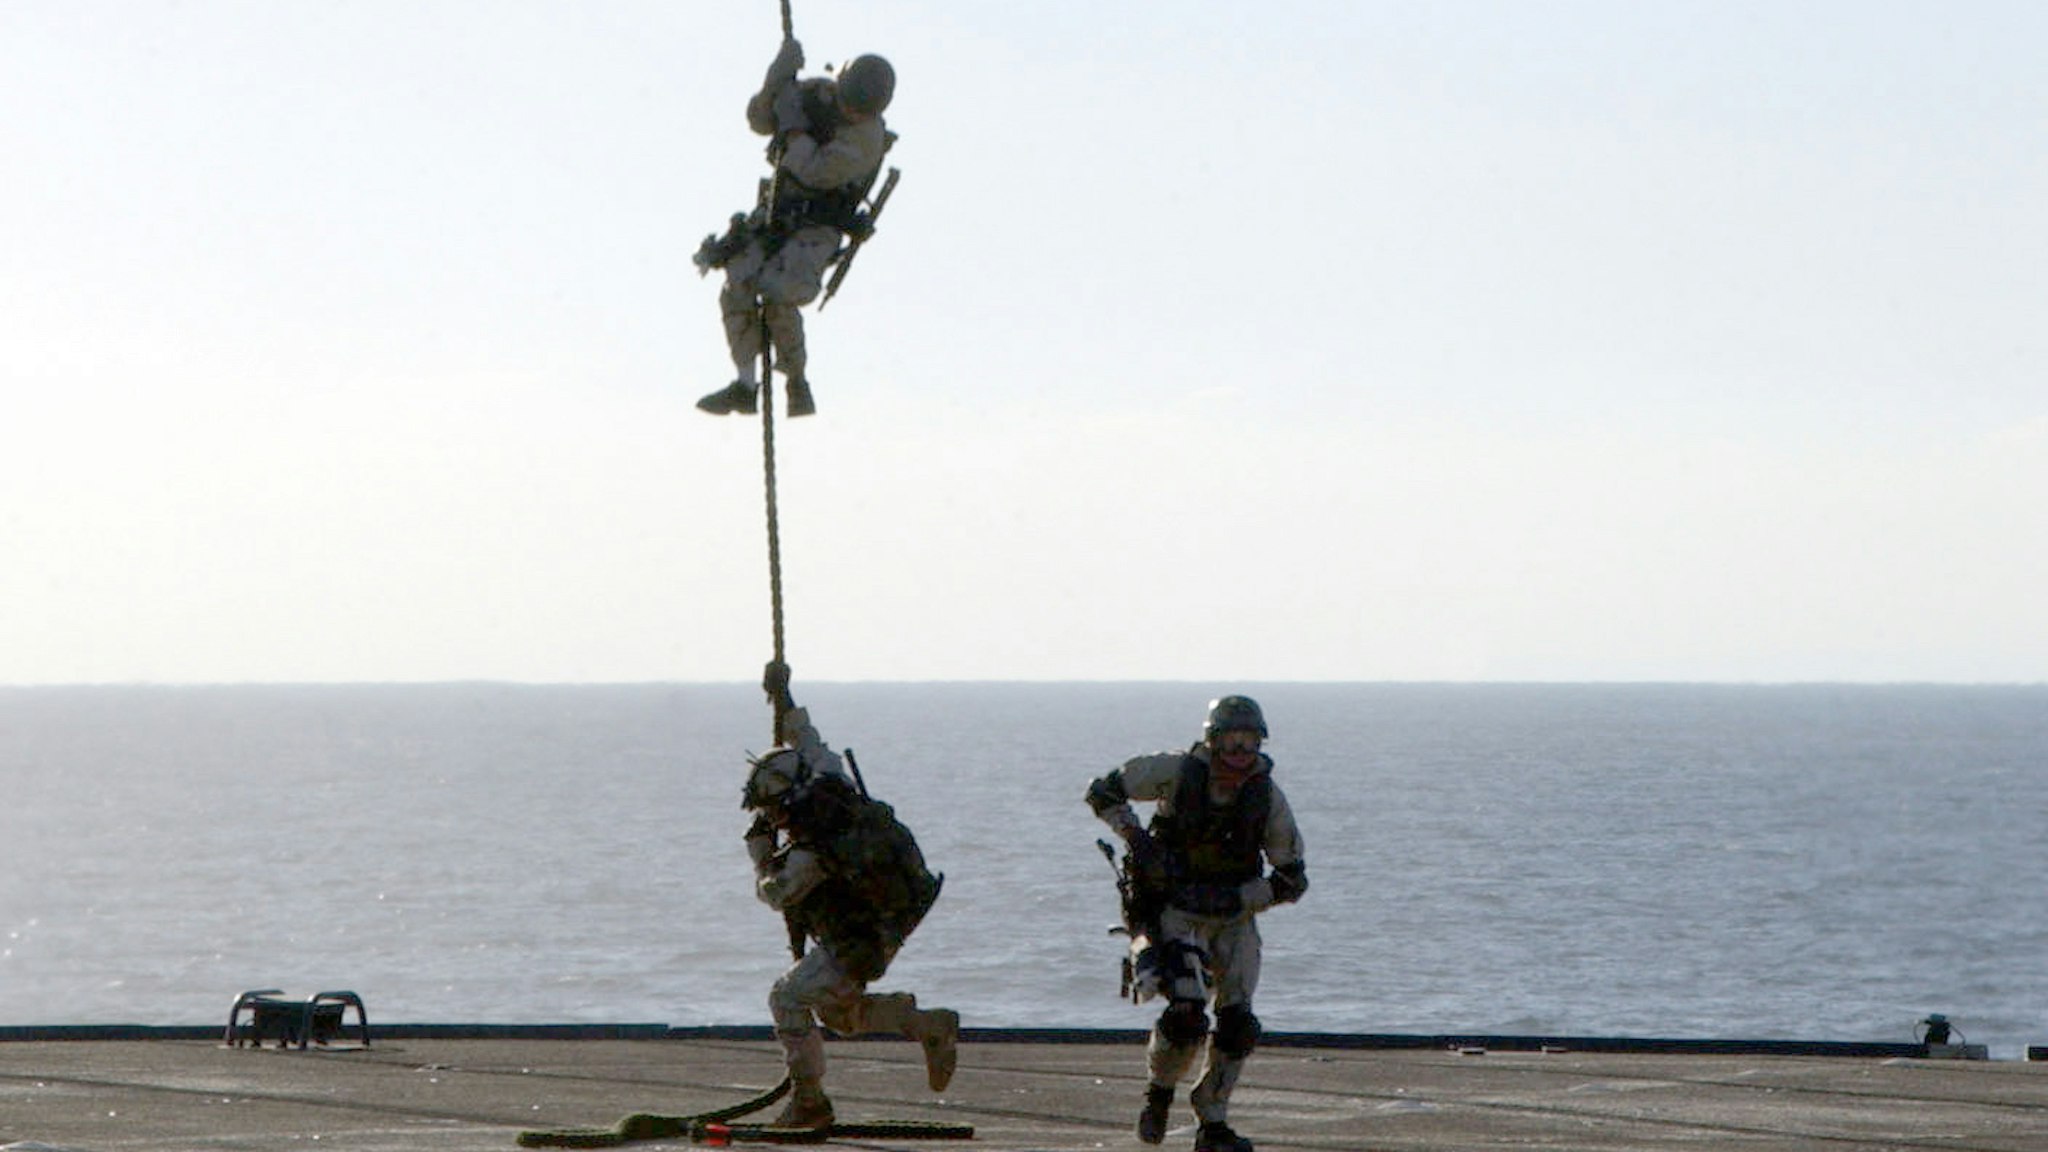 A U.S. Navy SEAL (SEa, Air, and Land) rappels from an MH-53 "Pave Low" helicopter to the deck of the amphibious command ship USS Mount Whitney during a training exercise January 17, 2003 while at sea.